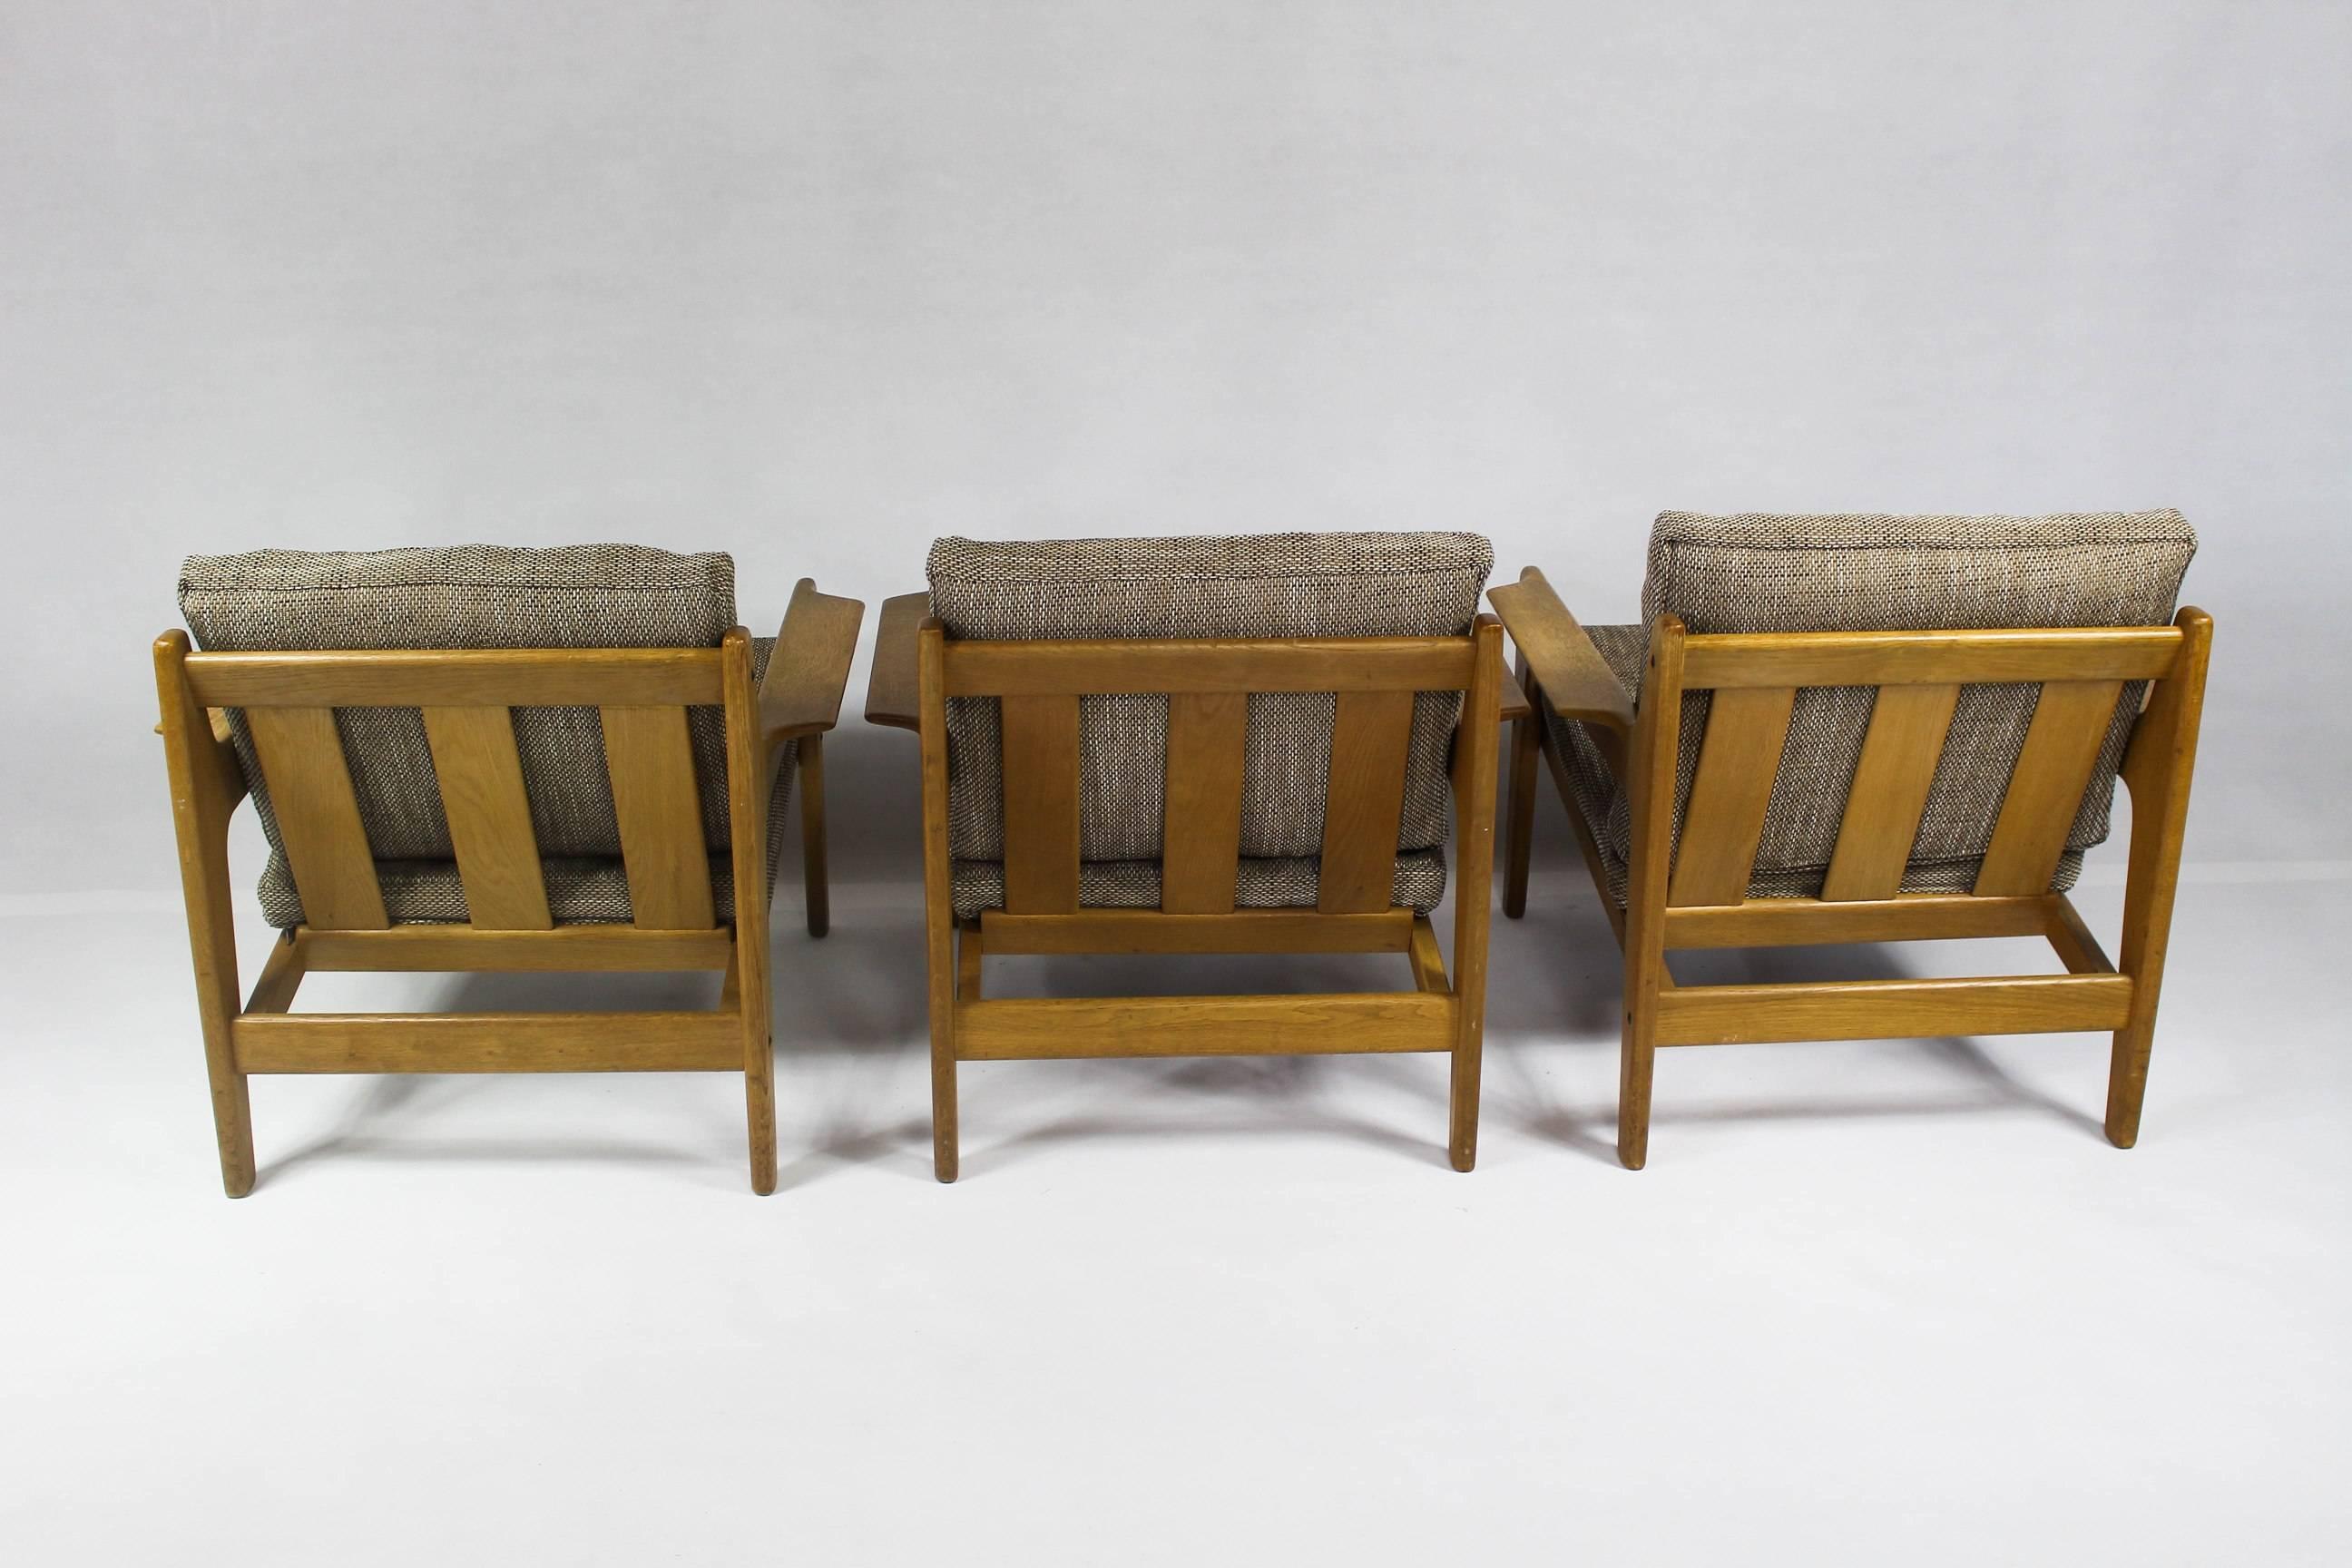 Price per one chair. We have Three in stock. 

The armchair was designed by Arne Wahl Iversen for Komfort in Denmark in the 1960s. It features a teak frame with original wool fabric cushions with zippers. They are in very good vintage condition.